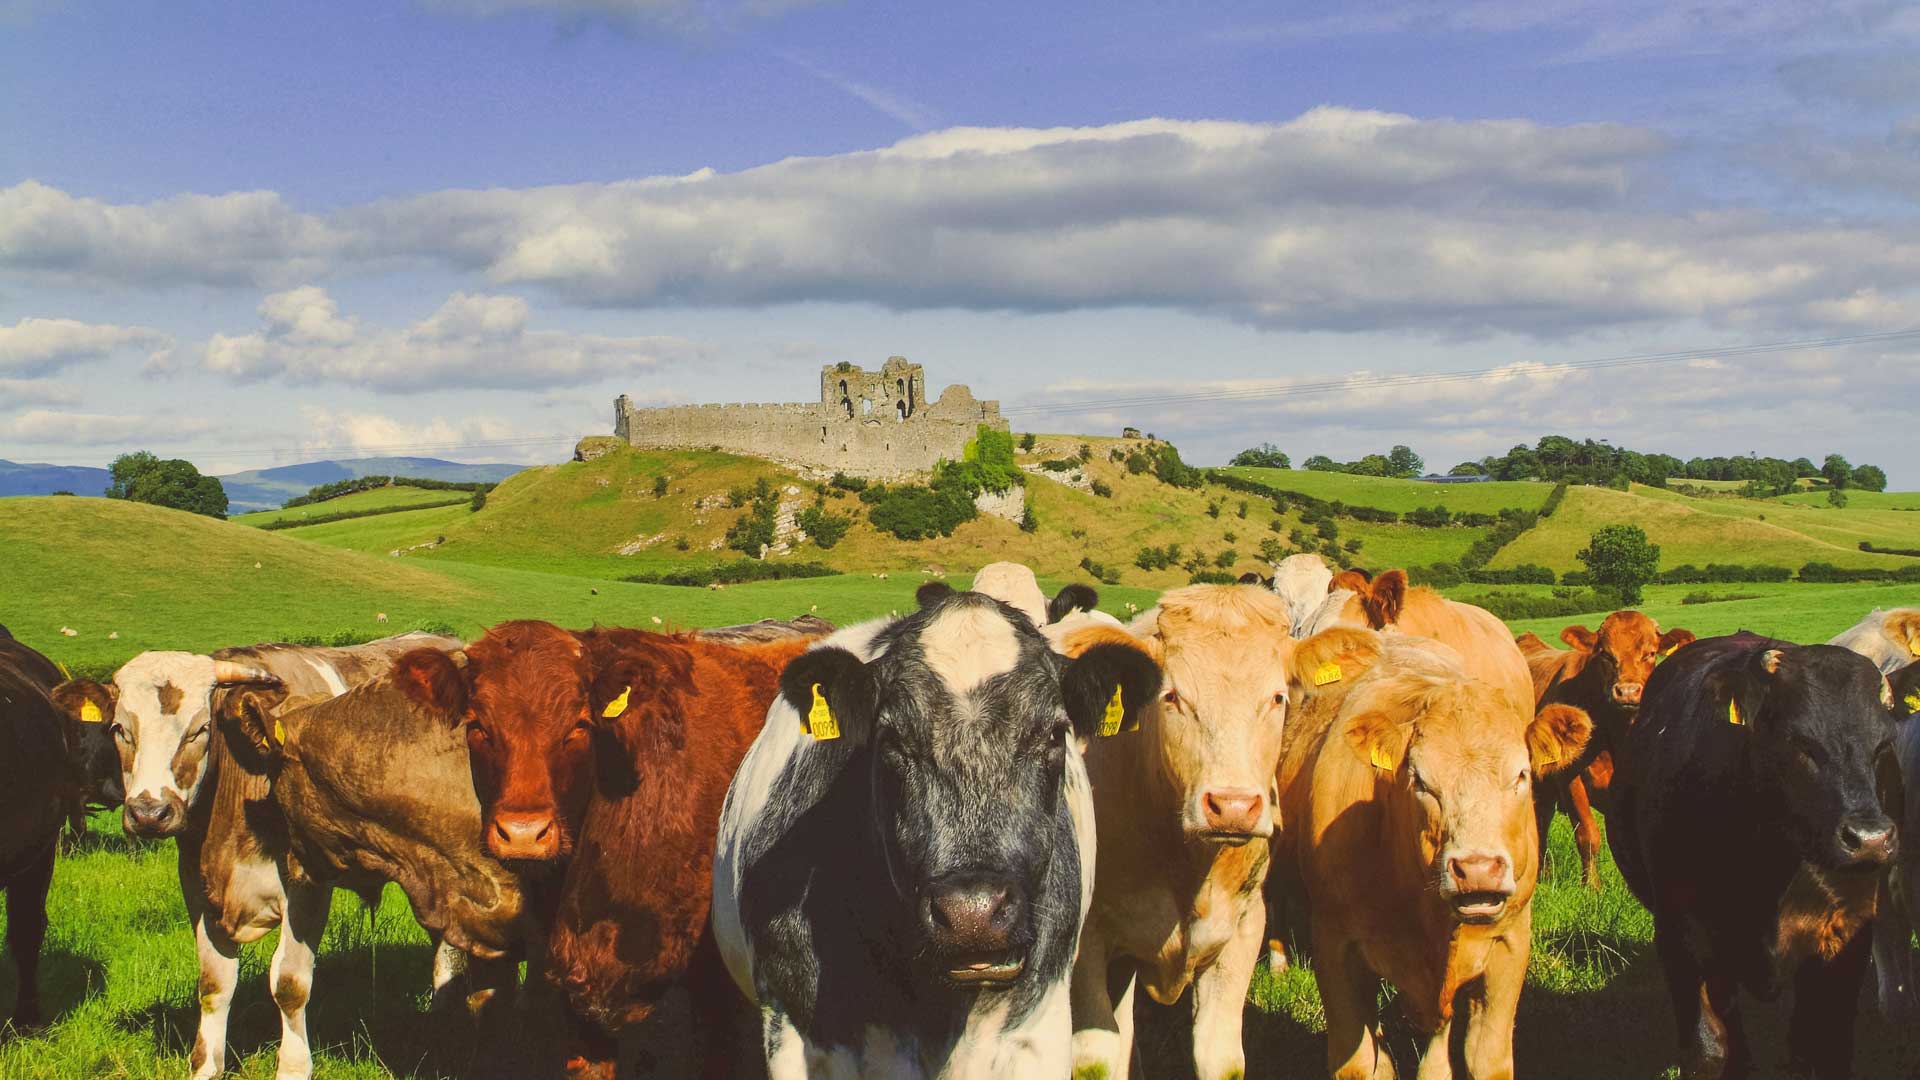 Cows in front of a castle in Ireland